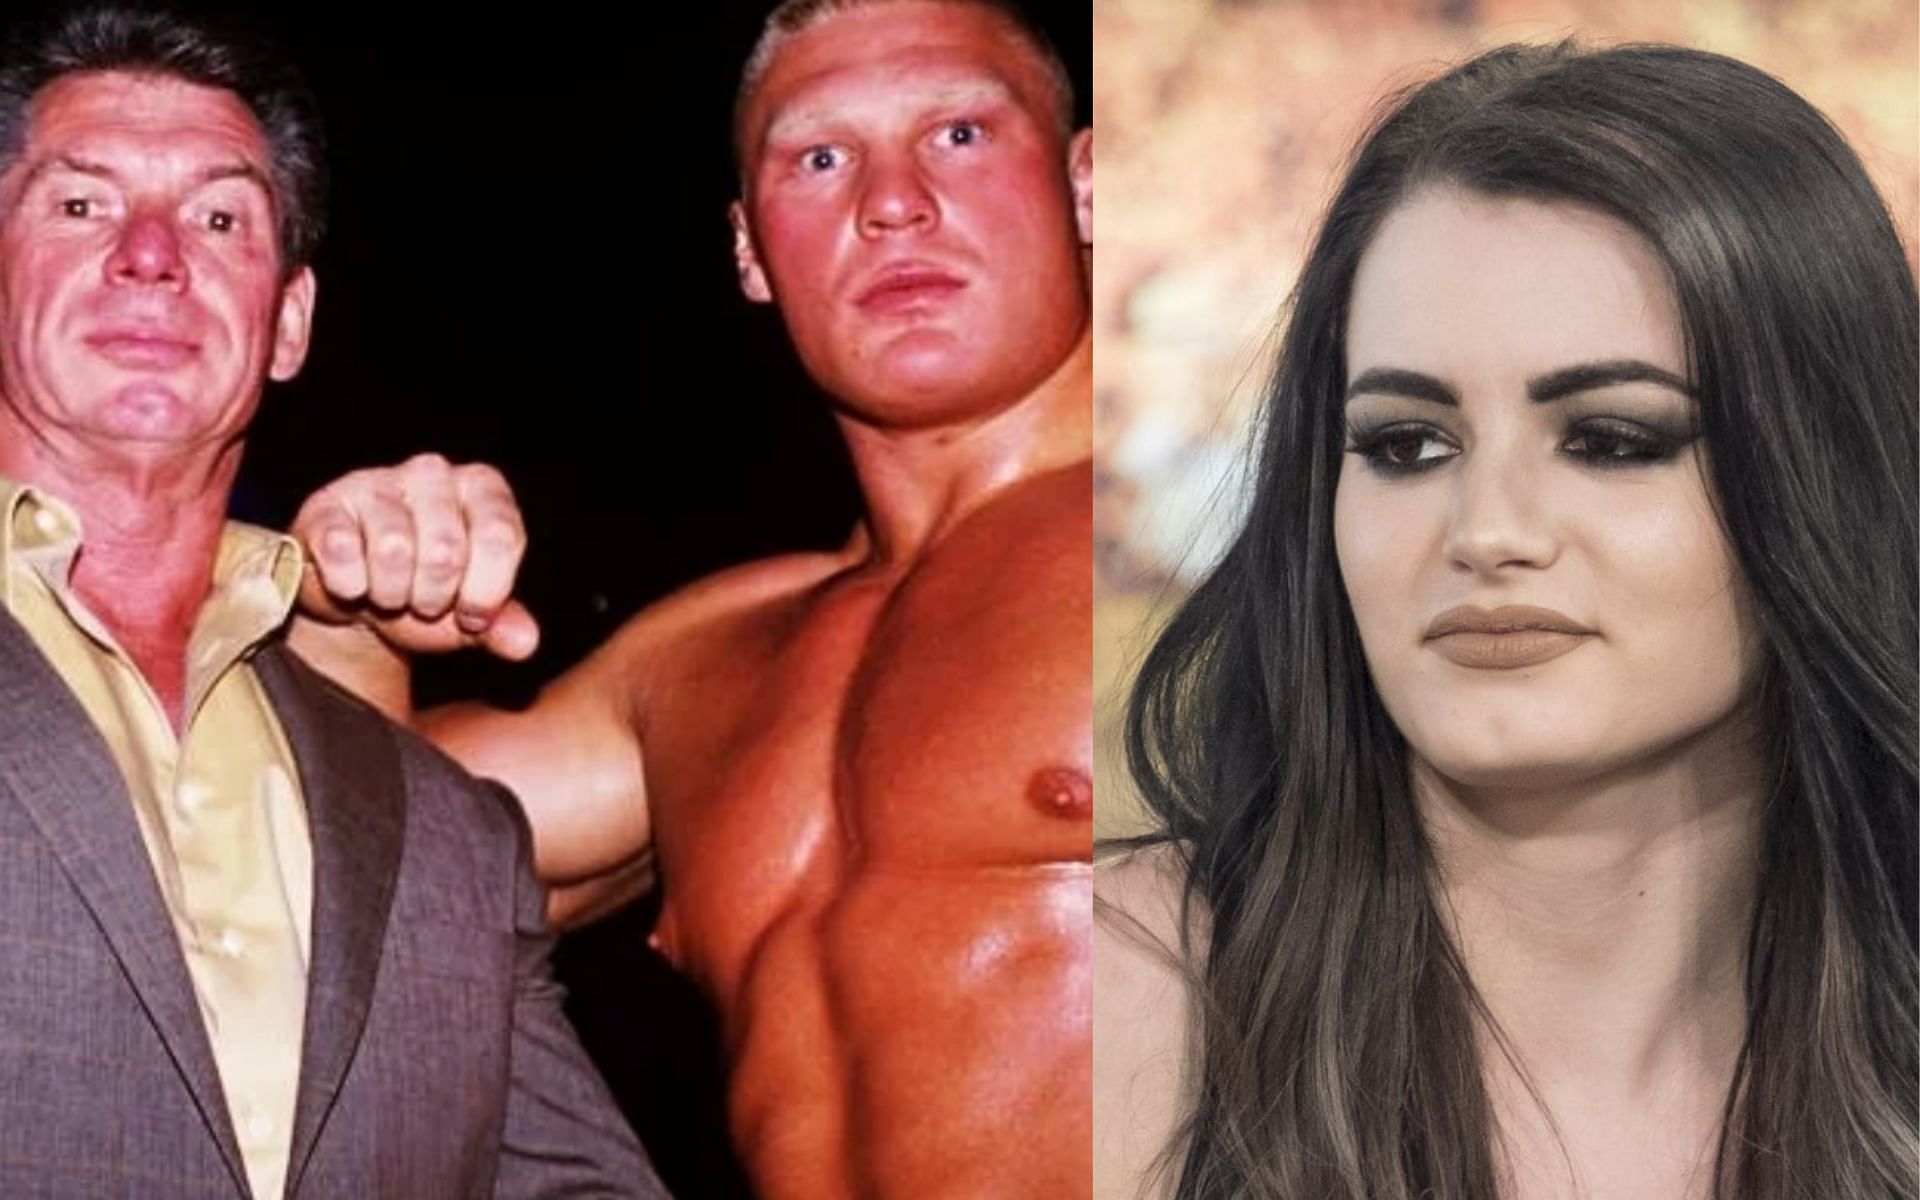 Vince McMahon with Brock Lesnar and former WWE Superstar, Paige